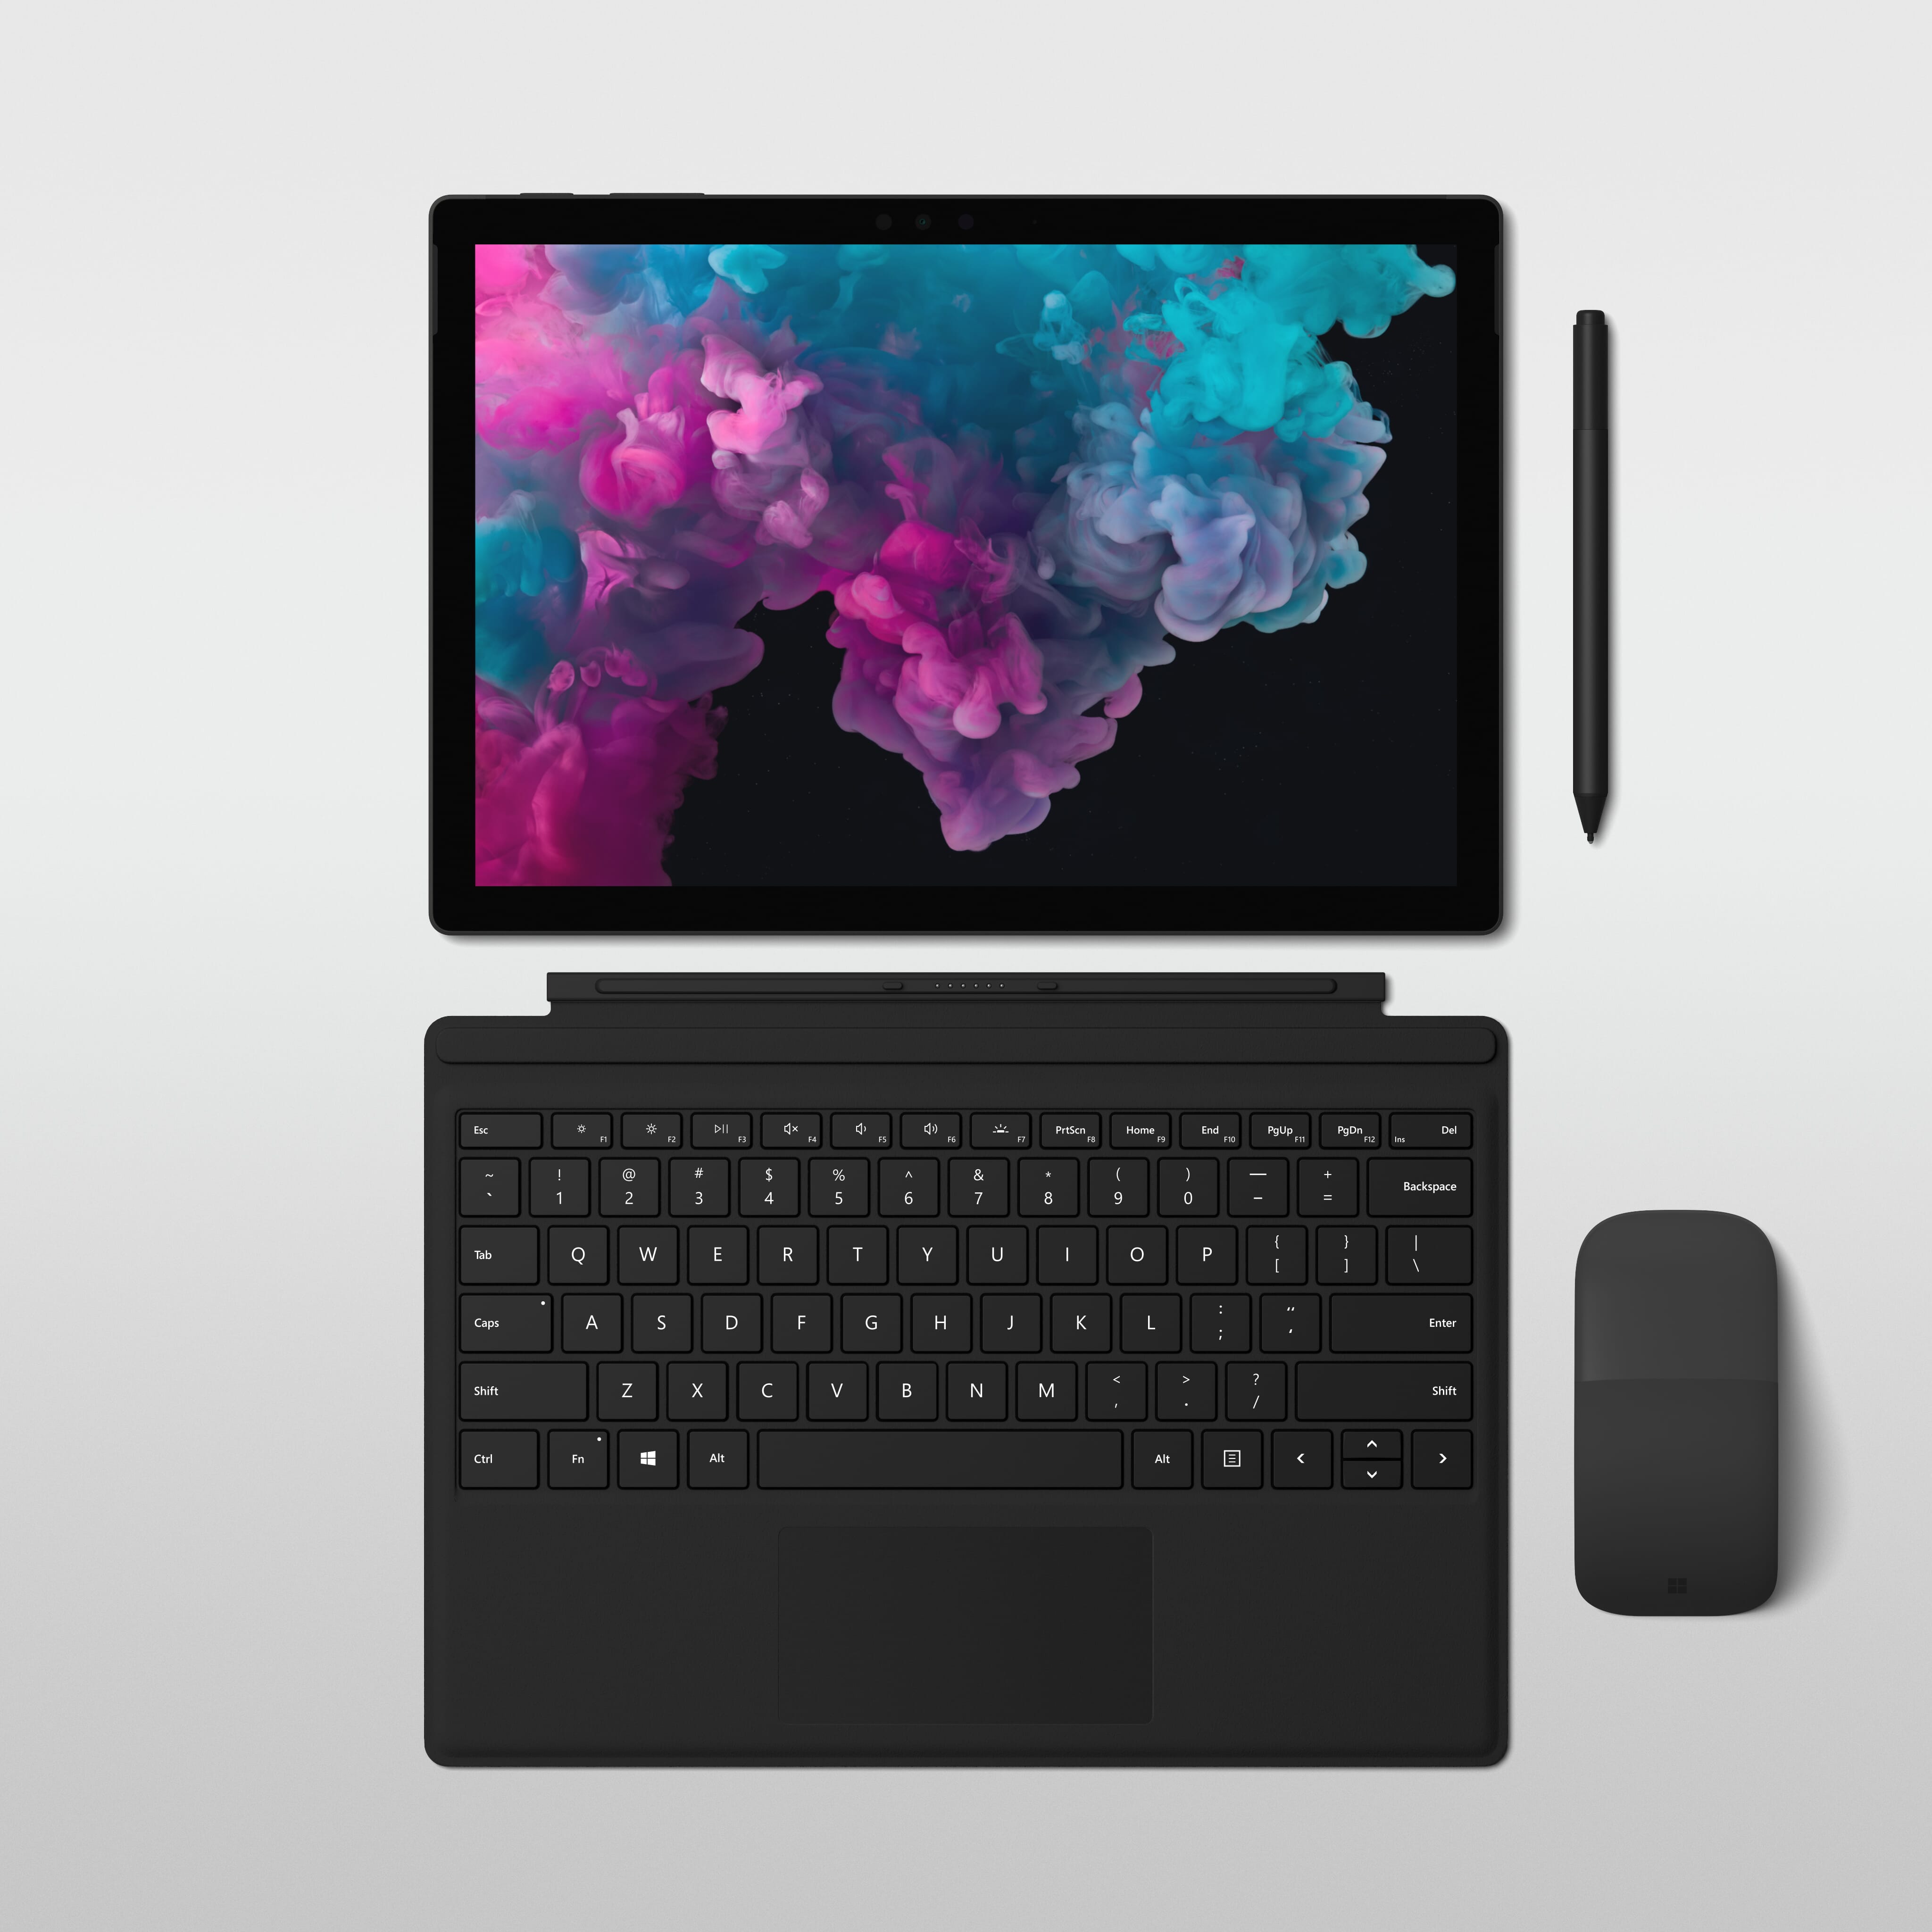 video editing surface pro x